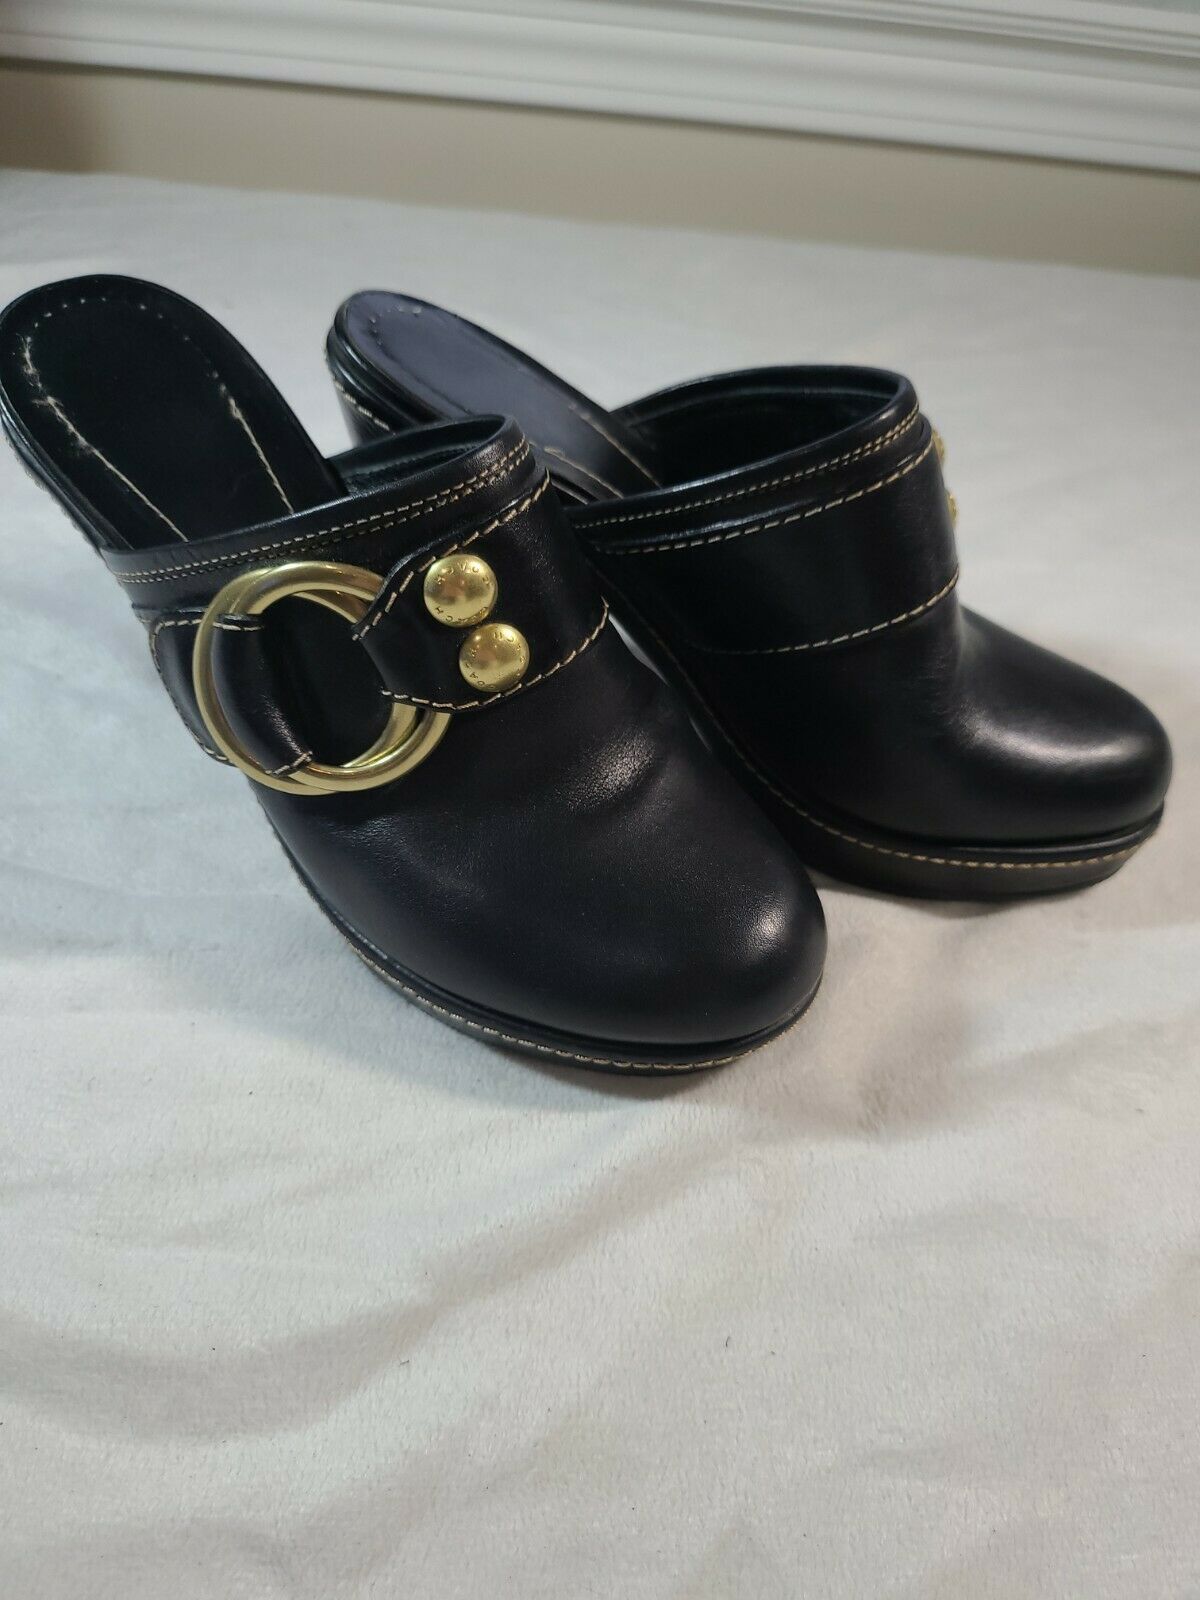 Coach shoes  5M black leather mules or clogs style name Clauds - $49.49